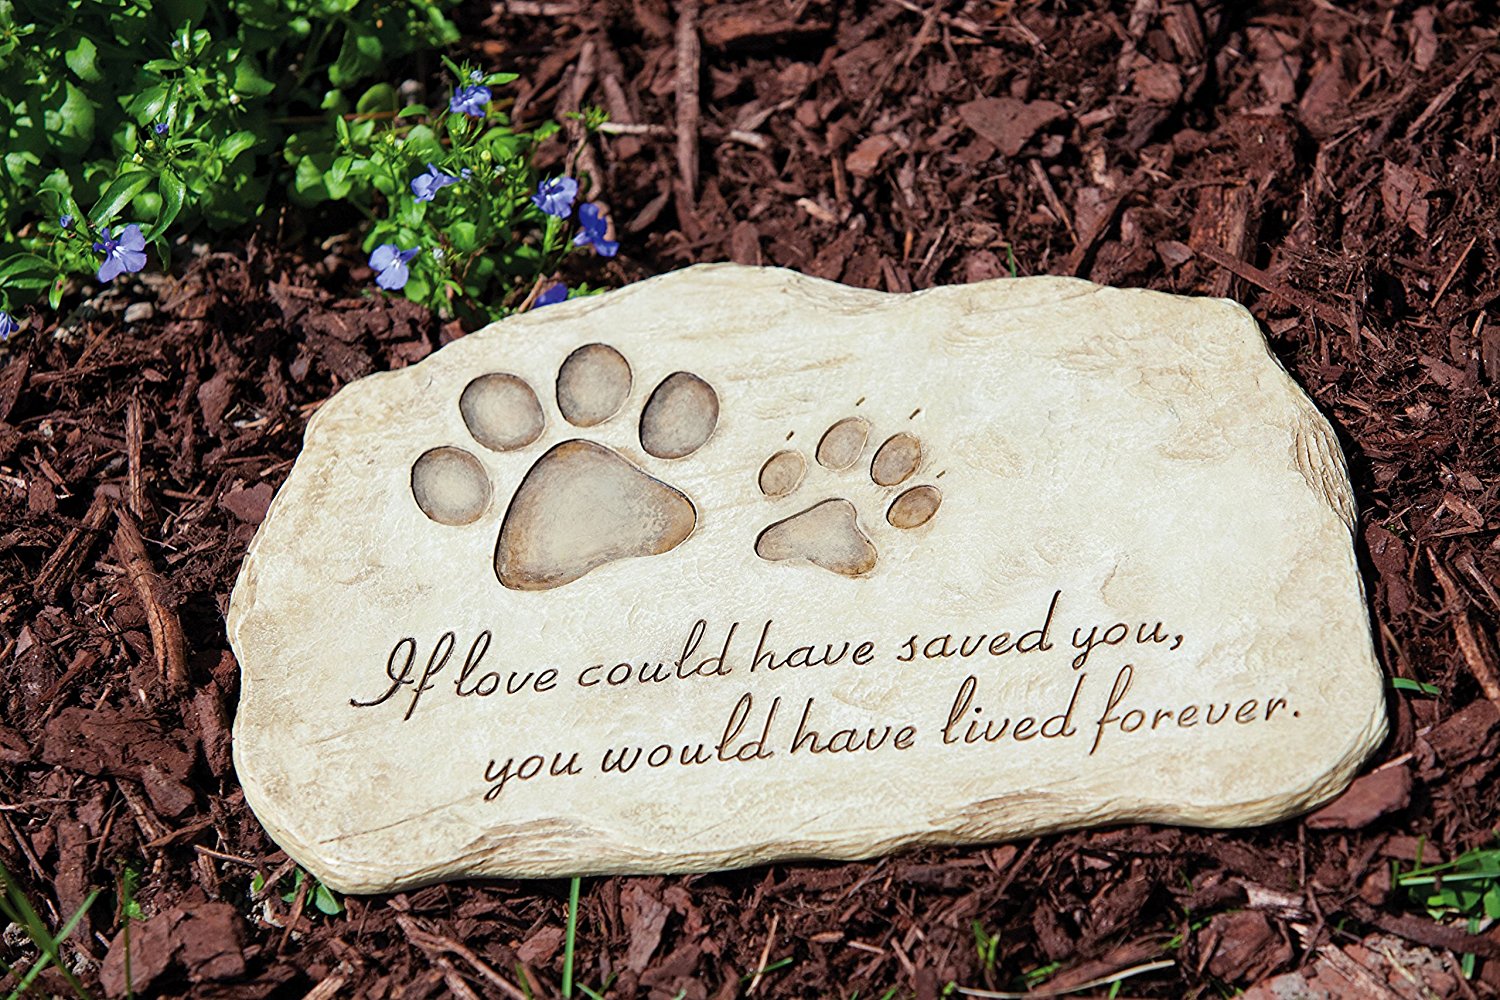 Pet Memorial Stone - If loved could have saved you, you would have lived forever!